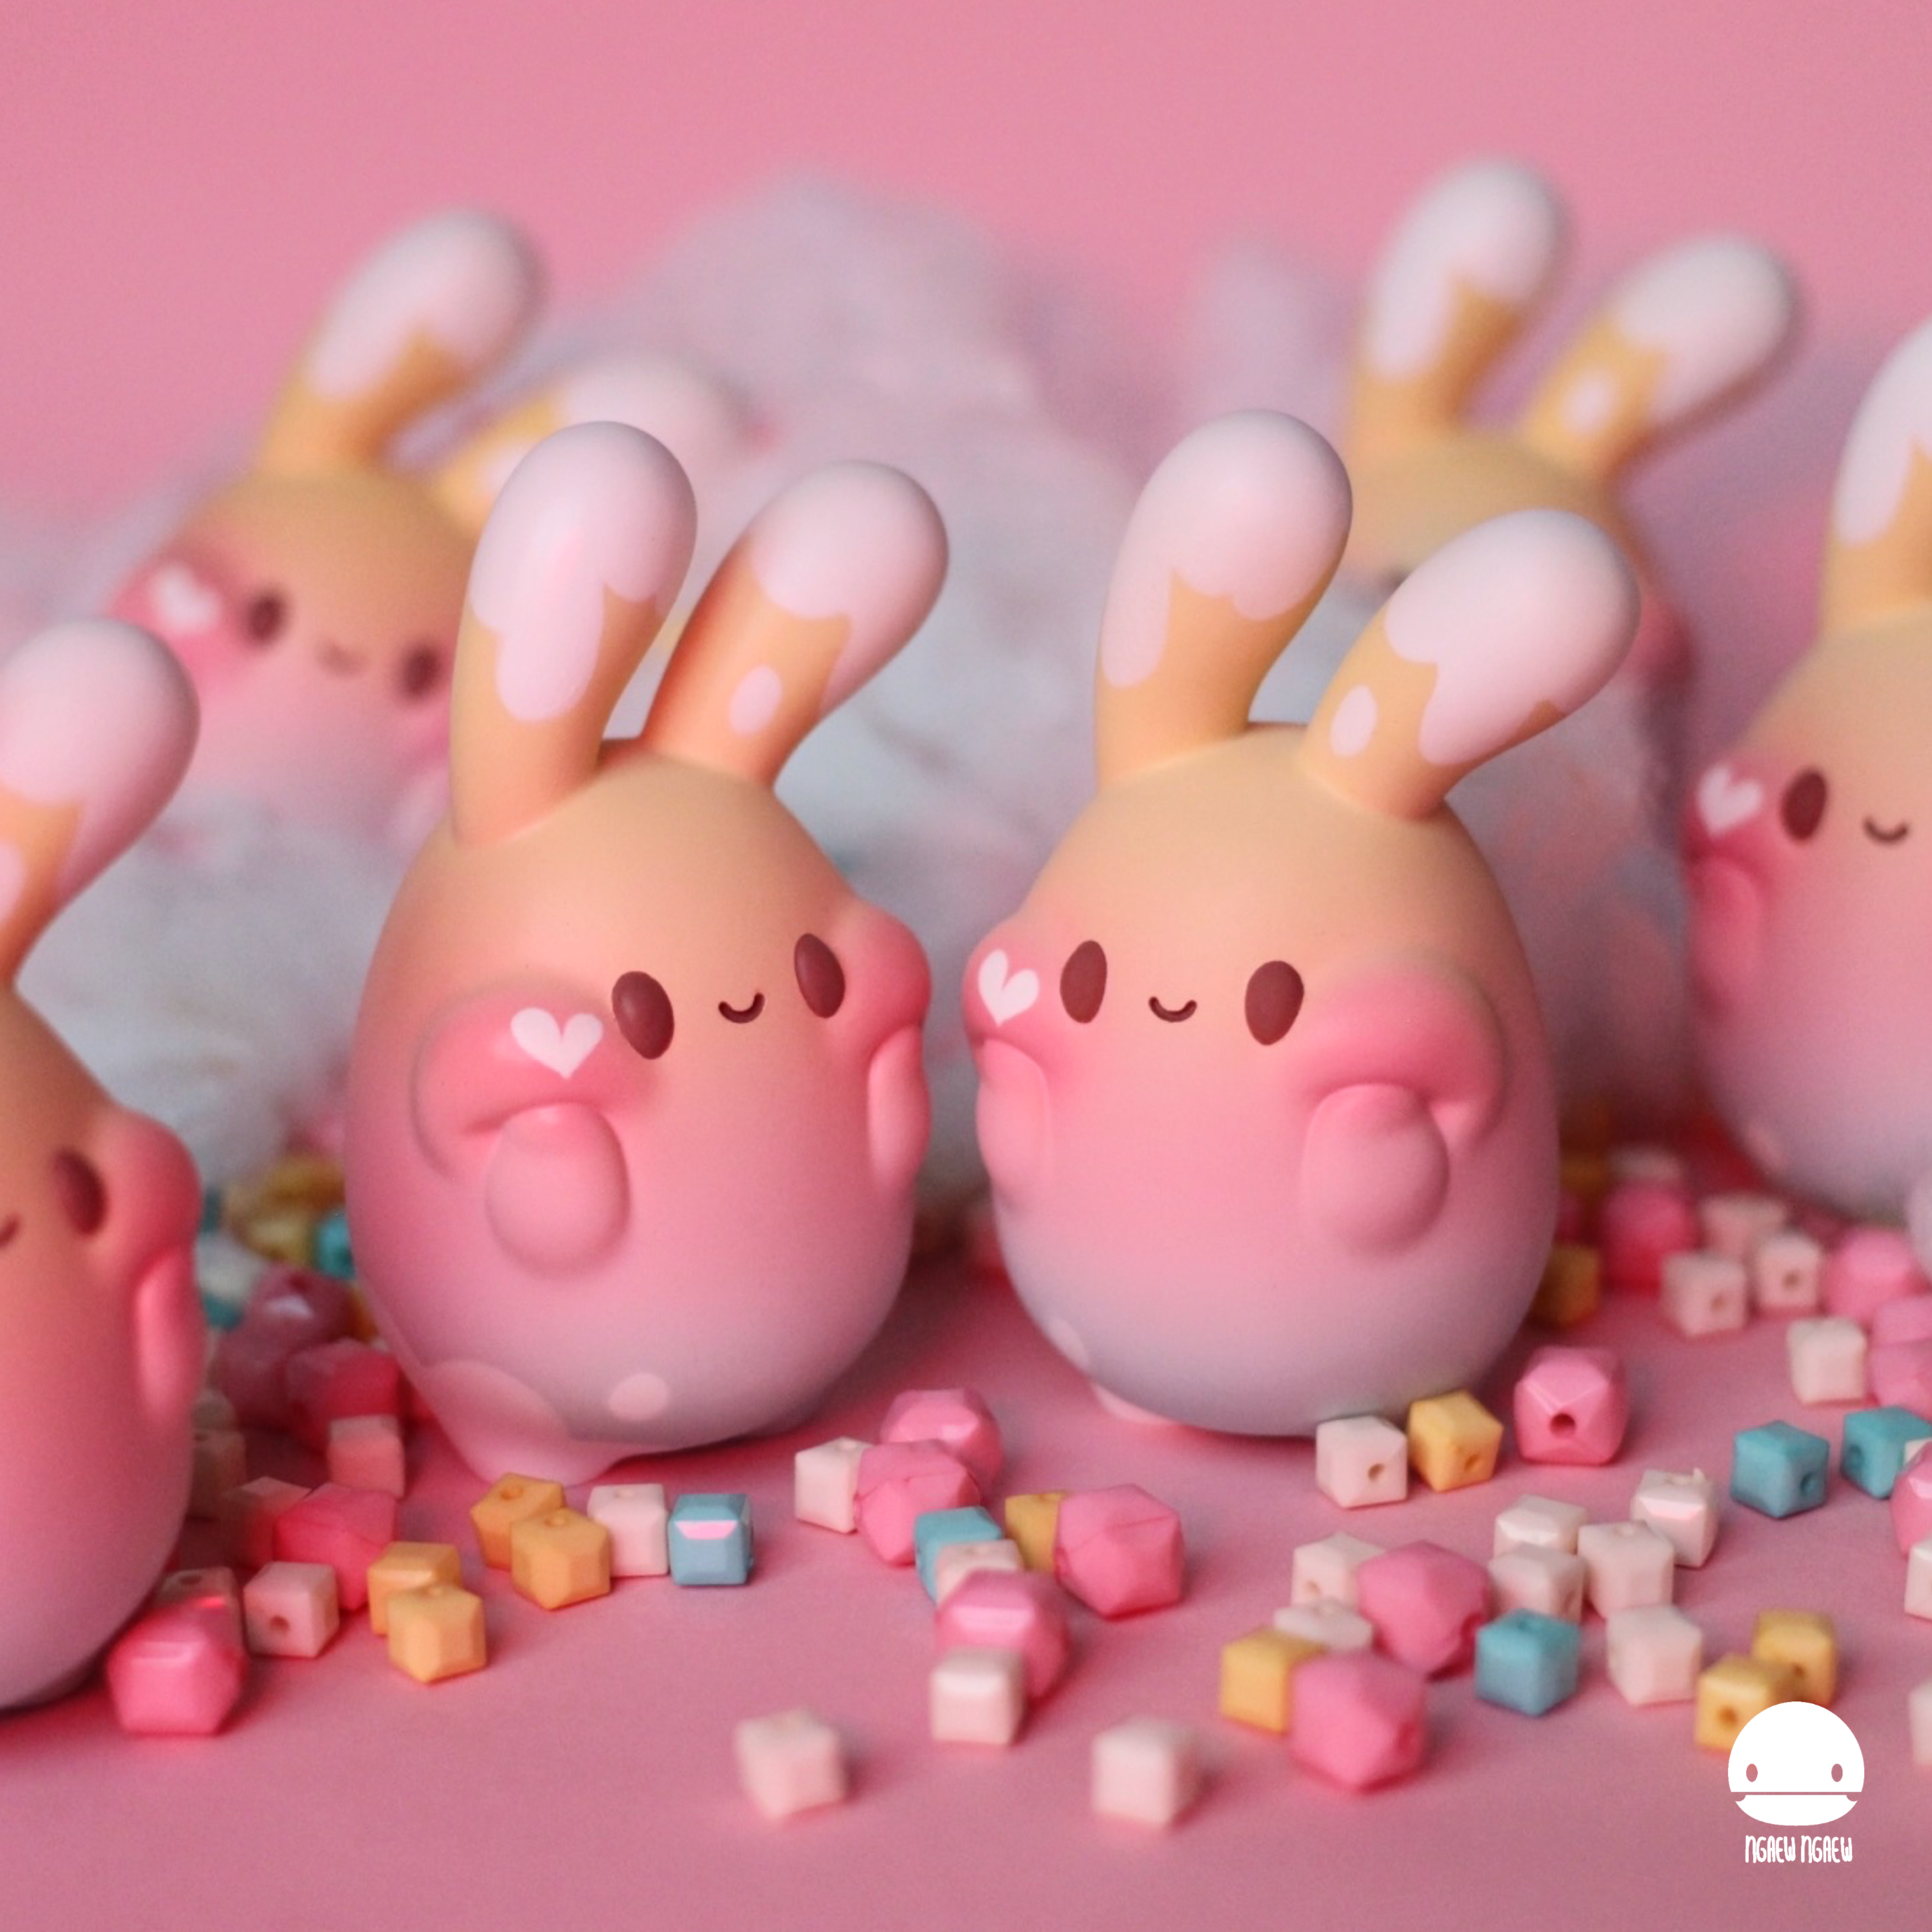 Ngaew ngaew Choco Rainbow by Ngaew Ngaew: Group of small bunnies, toy close-ups, square objects, and cubes in resin, 8 cm size.